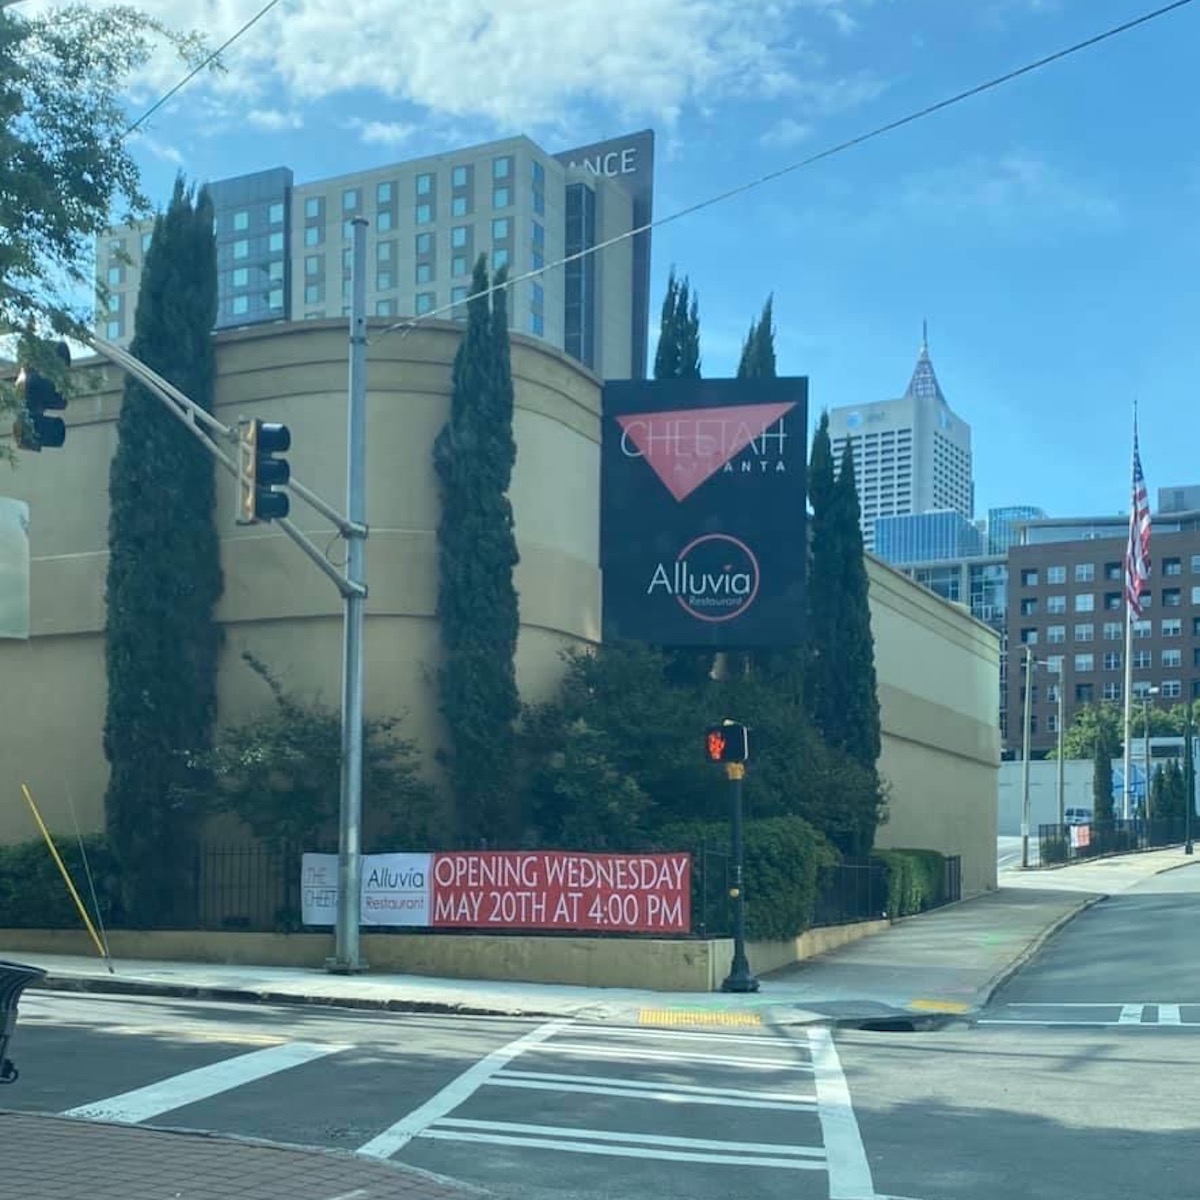 The Cheetah Lounge Giving Reopening a Go June 1 With Strippers Wearing  'Sexy' Gloves, Masks | What Now AtlantaThe Cheetah Lounge Giving Reopening  a Go June 1 With Strippers Wearing 'Sexy' Gloves,